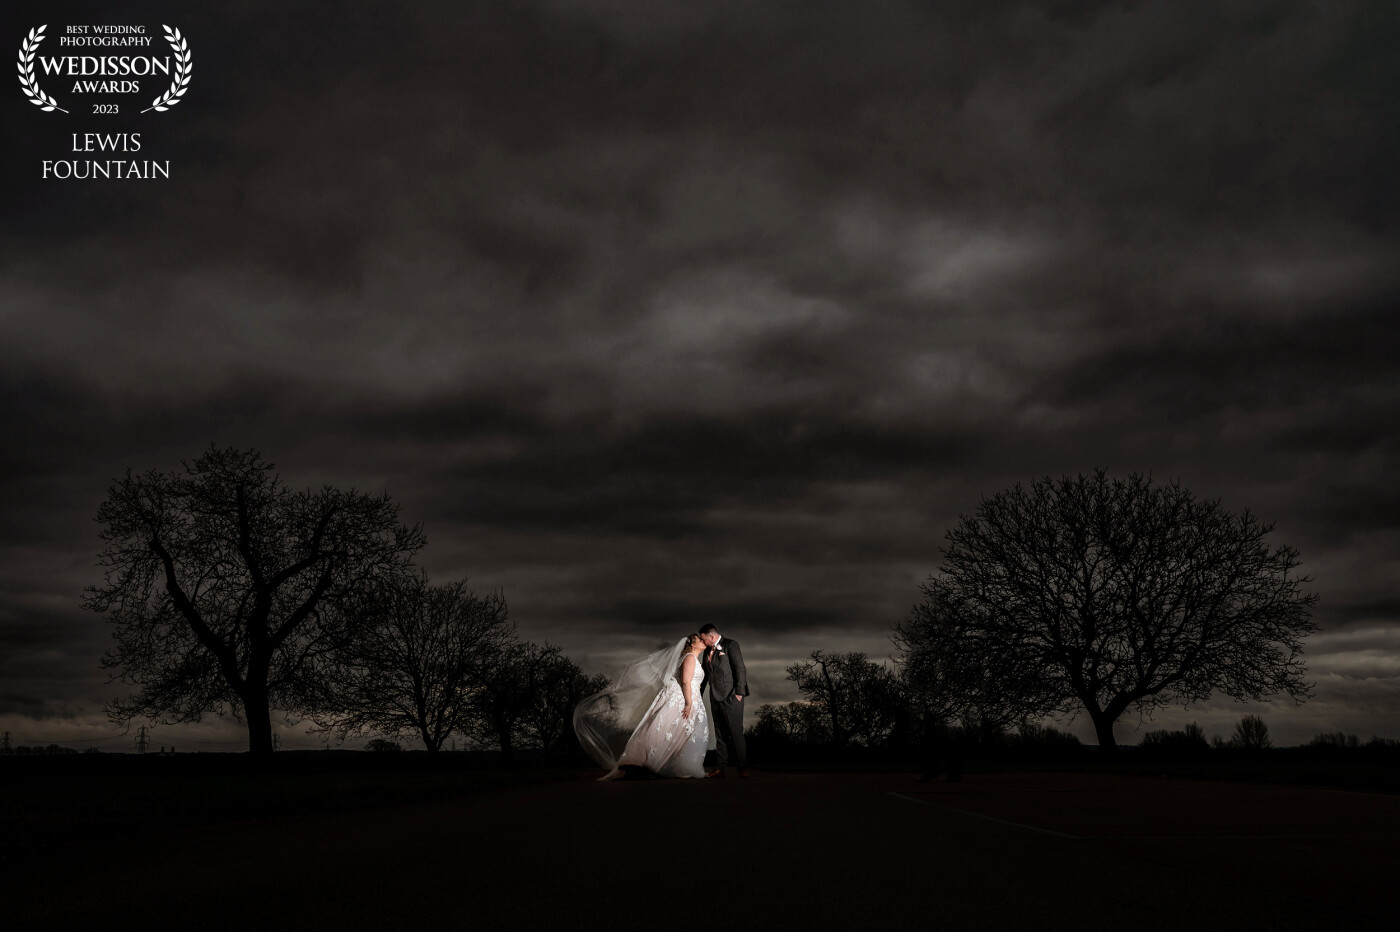 You may think that a grey, cold winter wedding at Bassmead Manor Barns would mean no drama, or a wow shot for the couples album, but days like these just make us think outside the box.<br />
Wait for the light to drop, bring out the mobile lights and you can work wonders with a grey sky 🙏🏼